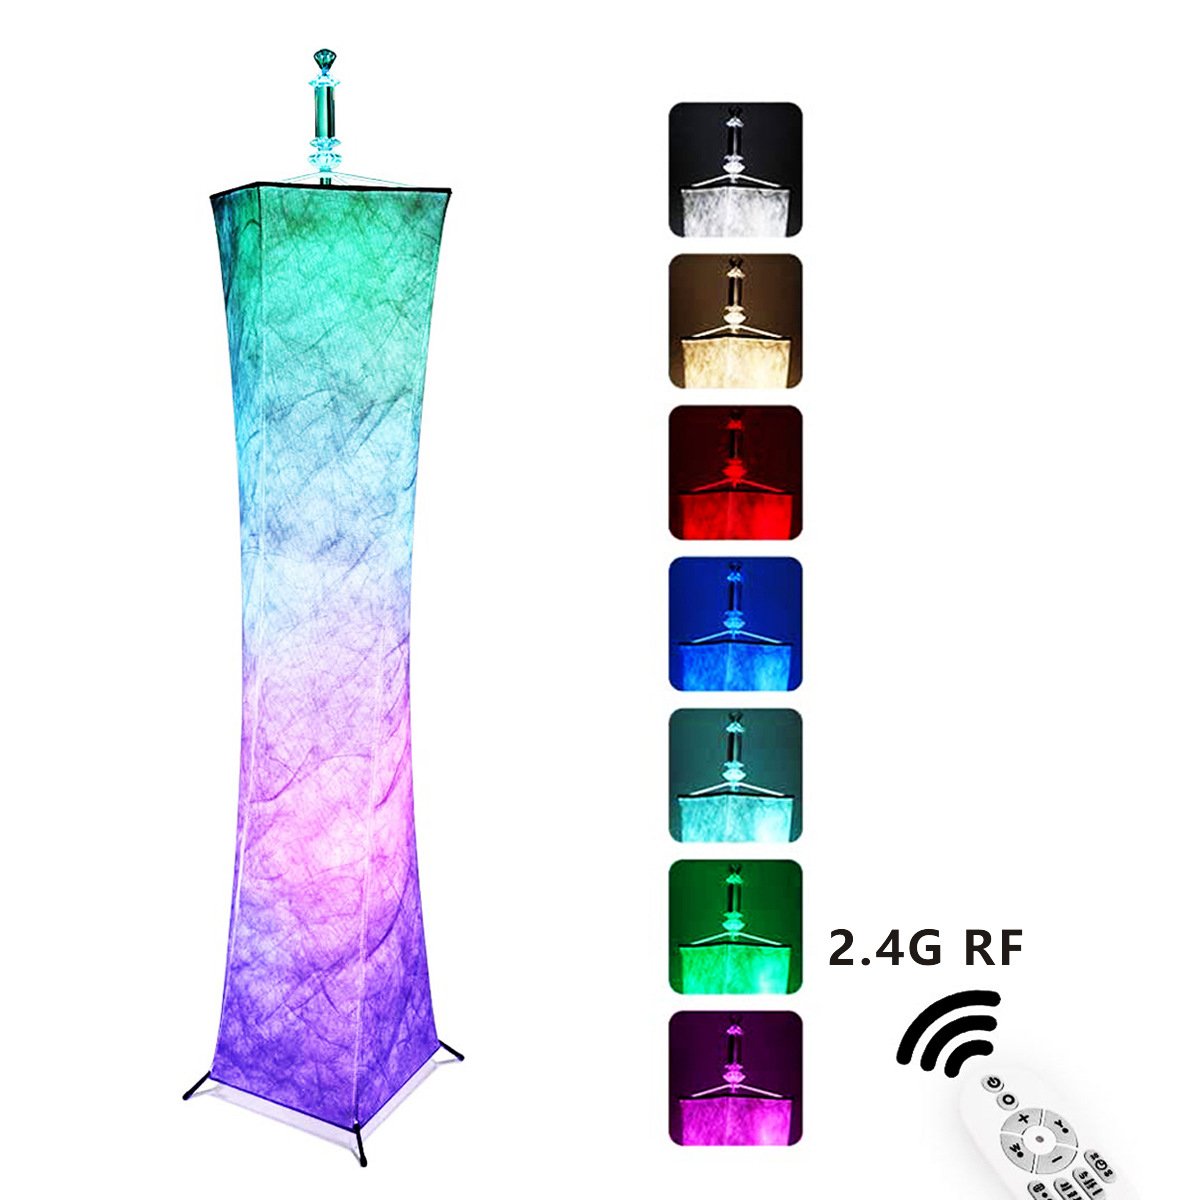 12V-LED-Floor-Lamp-Remote-Control-RGB-Color-Changing-58quot-Height-Bulbs-for-Livingroomish-1806500-4